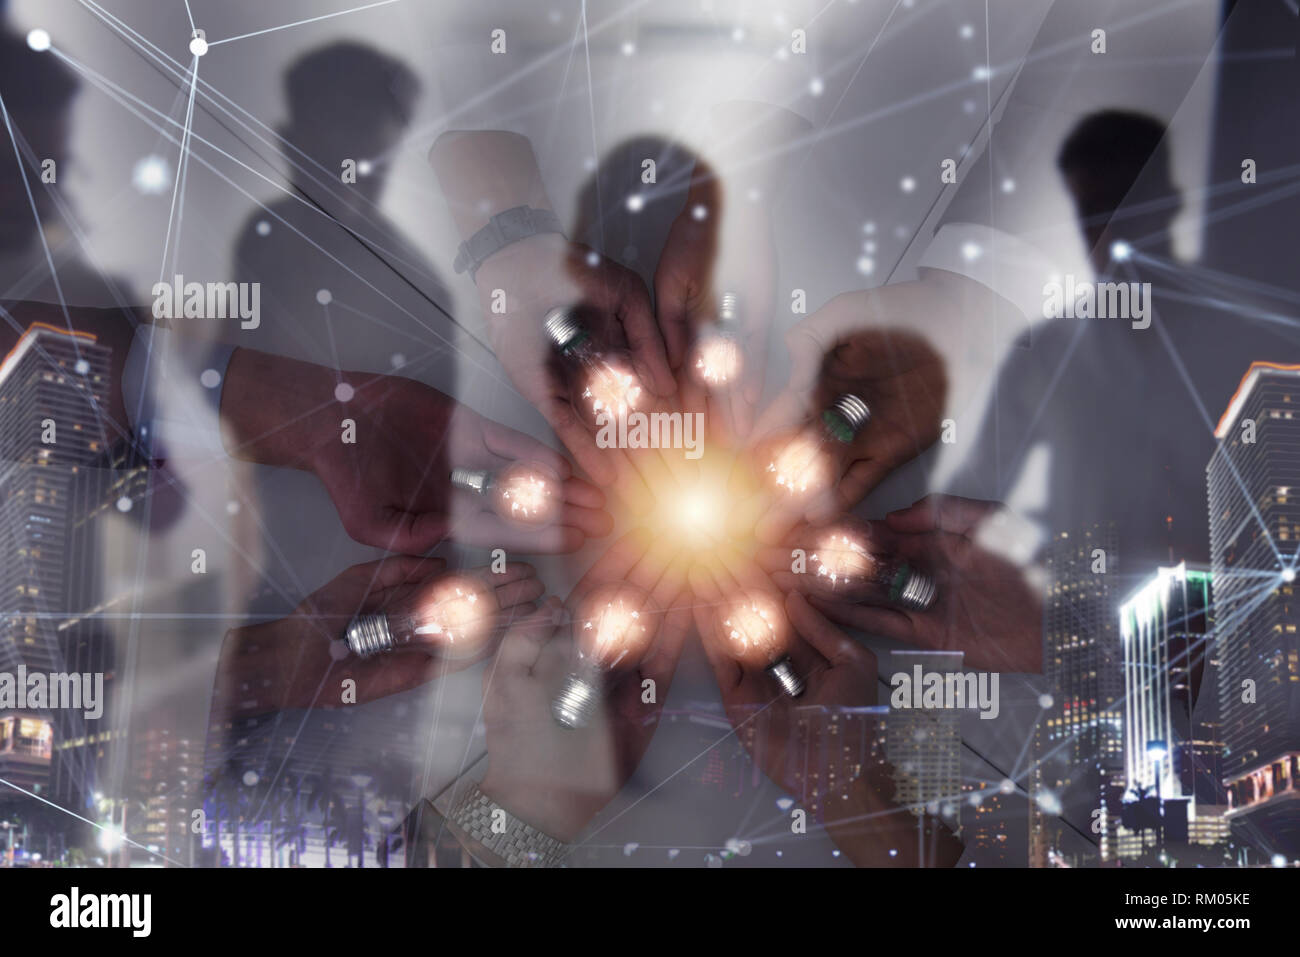 Teamwork and brainstorming concept with businessmen that share an idea with a lamp with network lines. Concept of startup. Double exposure Stock Photo